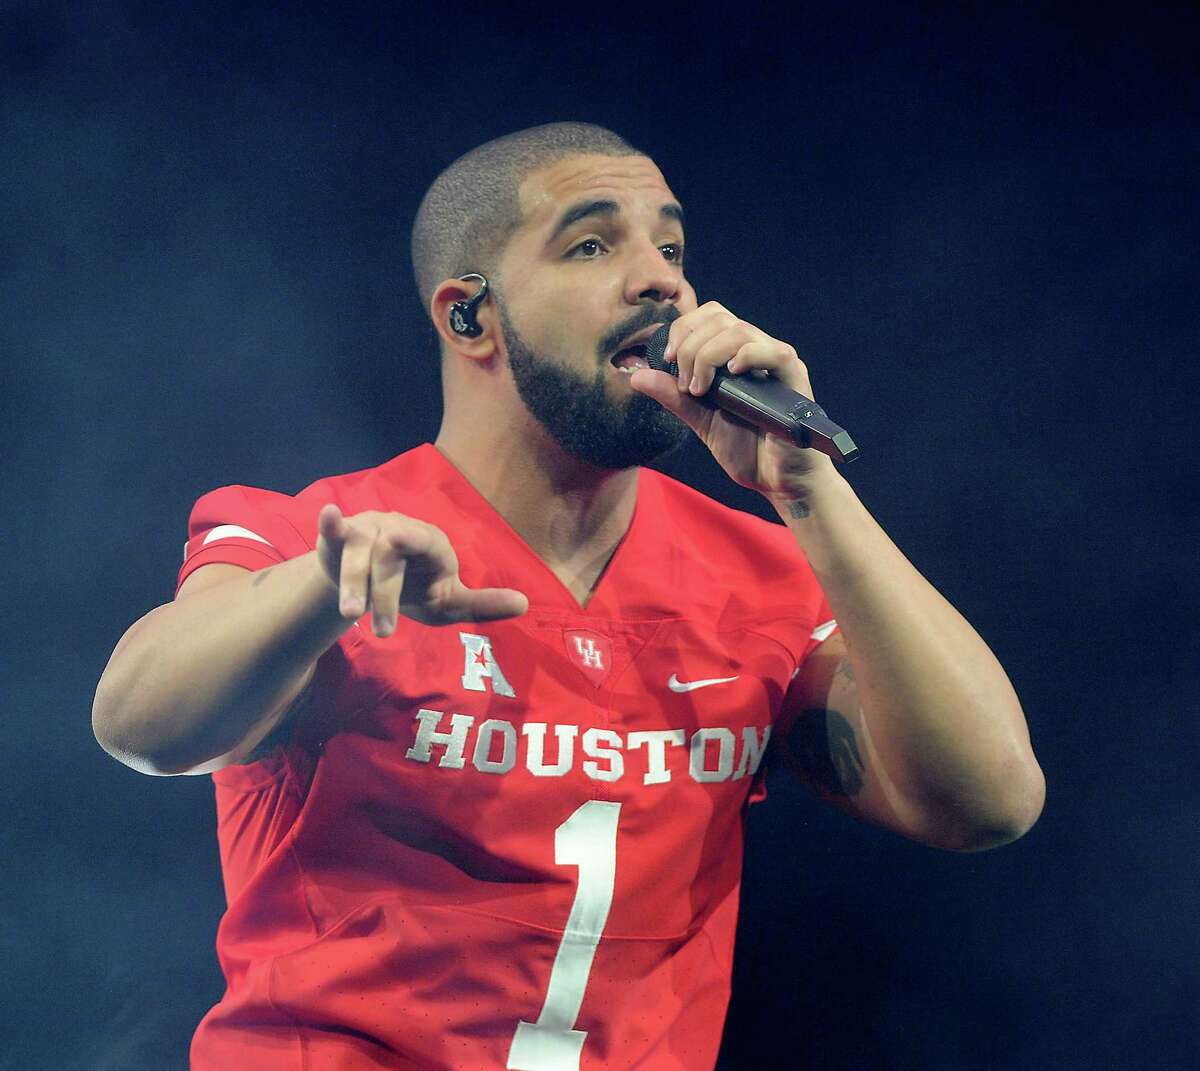 Drake has repped for Houston for years.